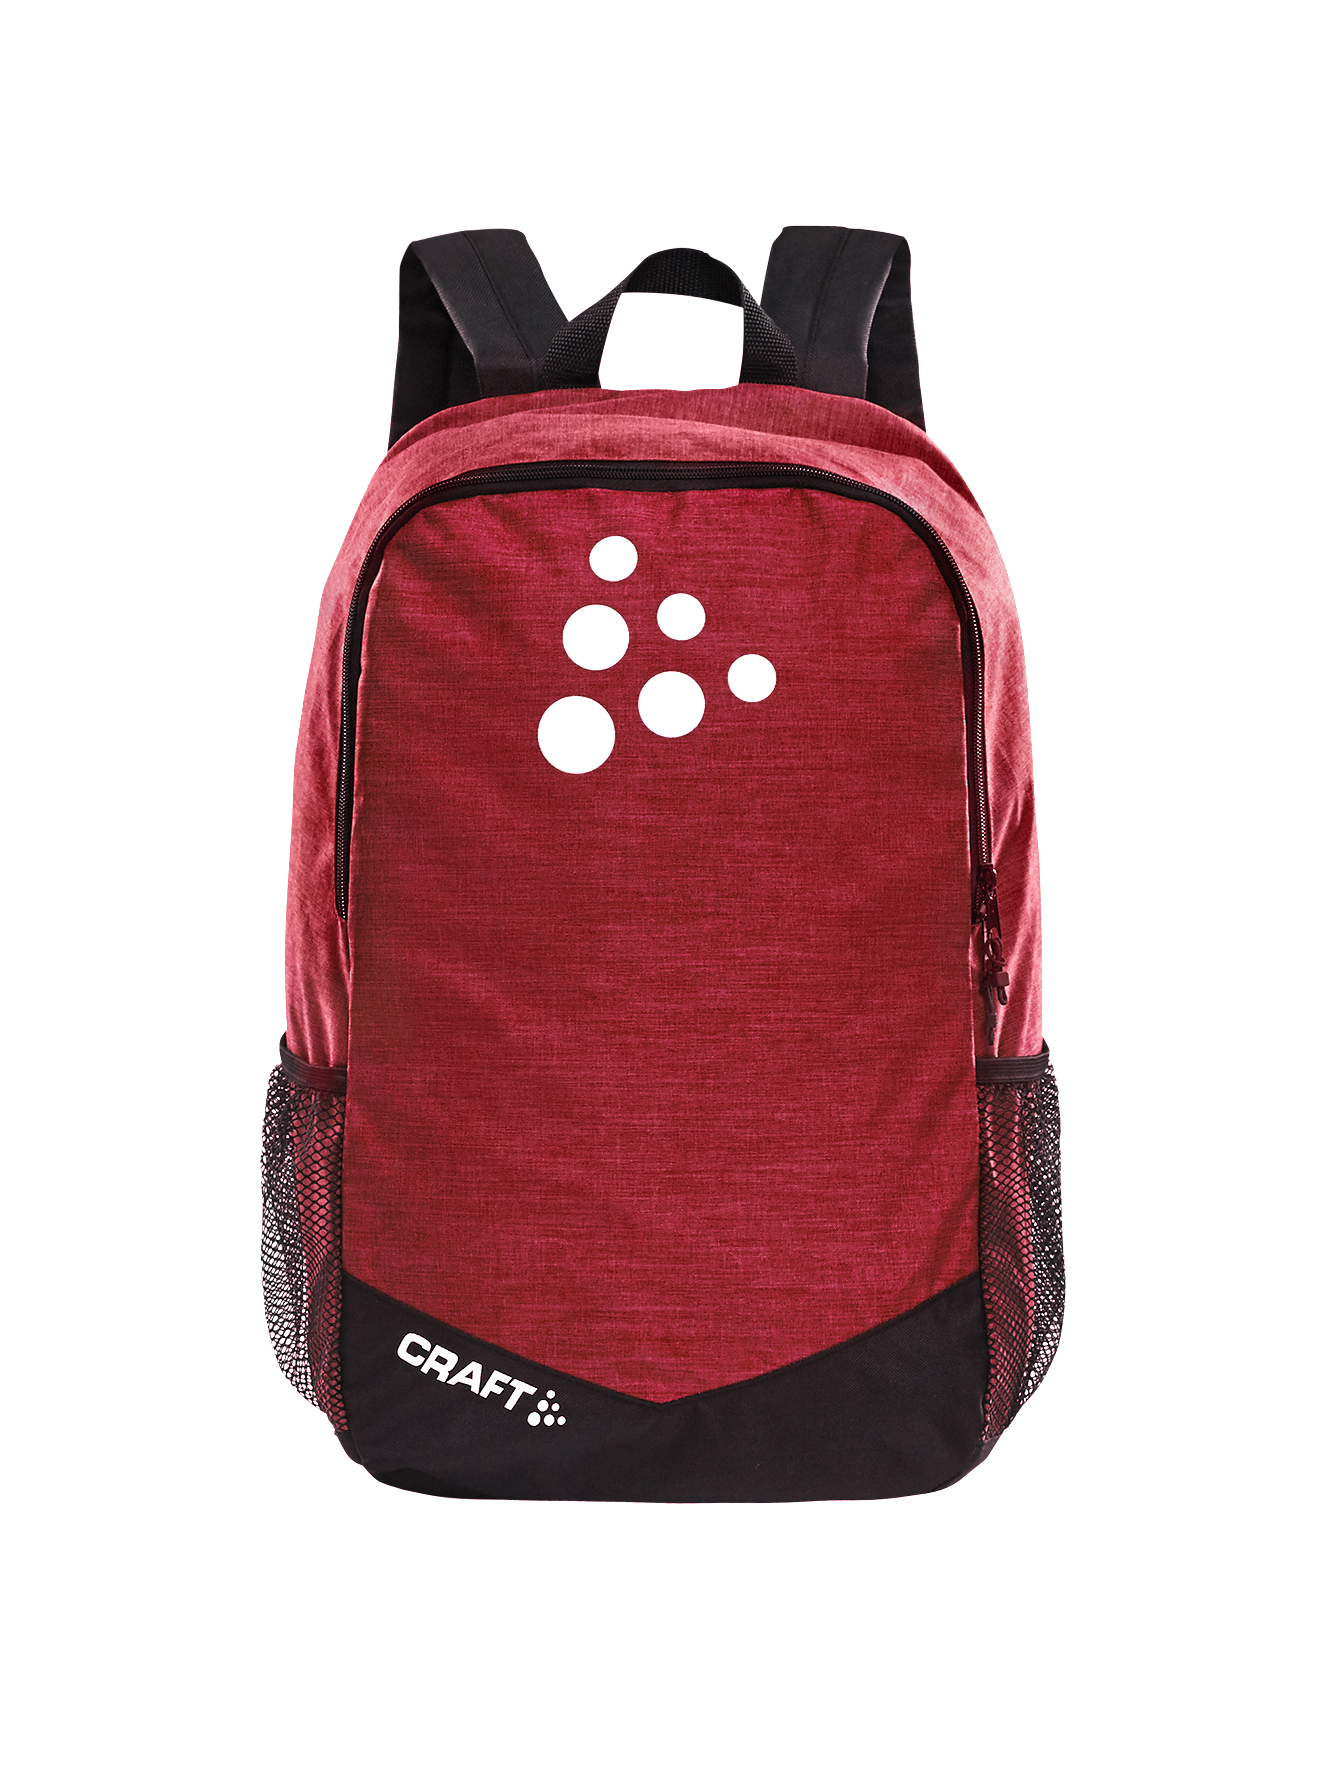 1905597_9430_CRAFT_TEAMSPORT_Squad_PRACTICE_Backpack_black_bright_red_sgequipement_sg_equipement